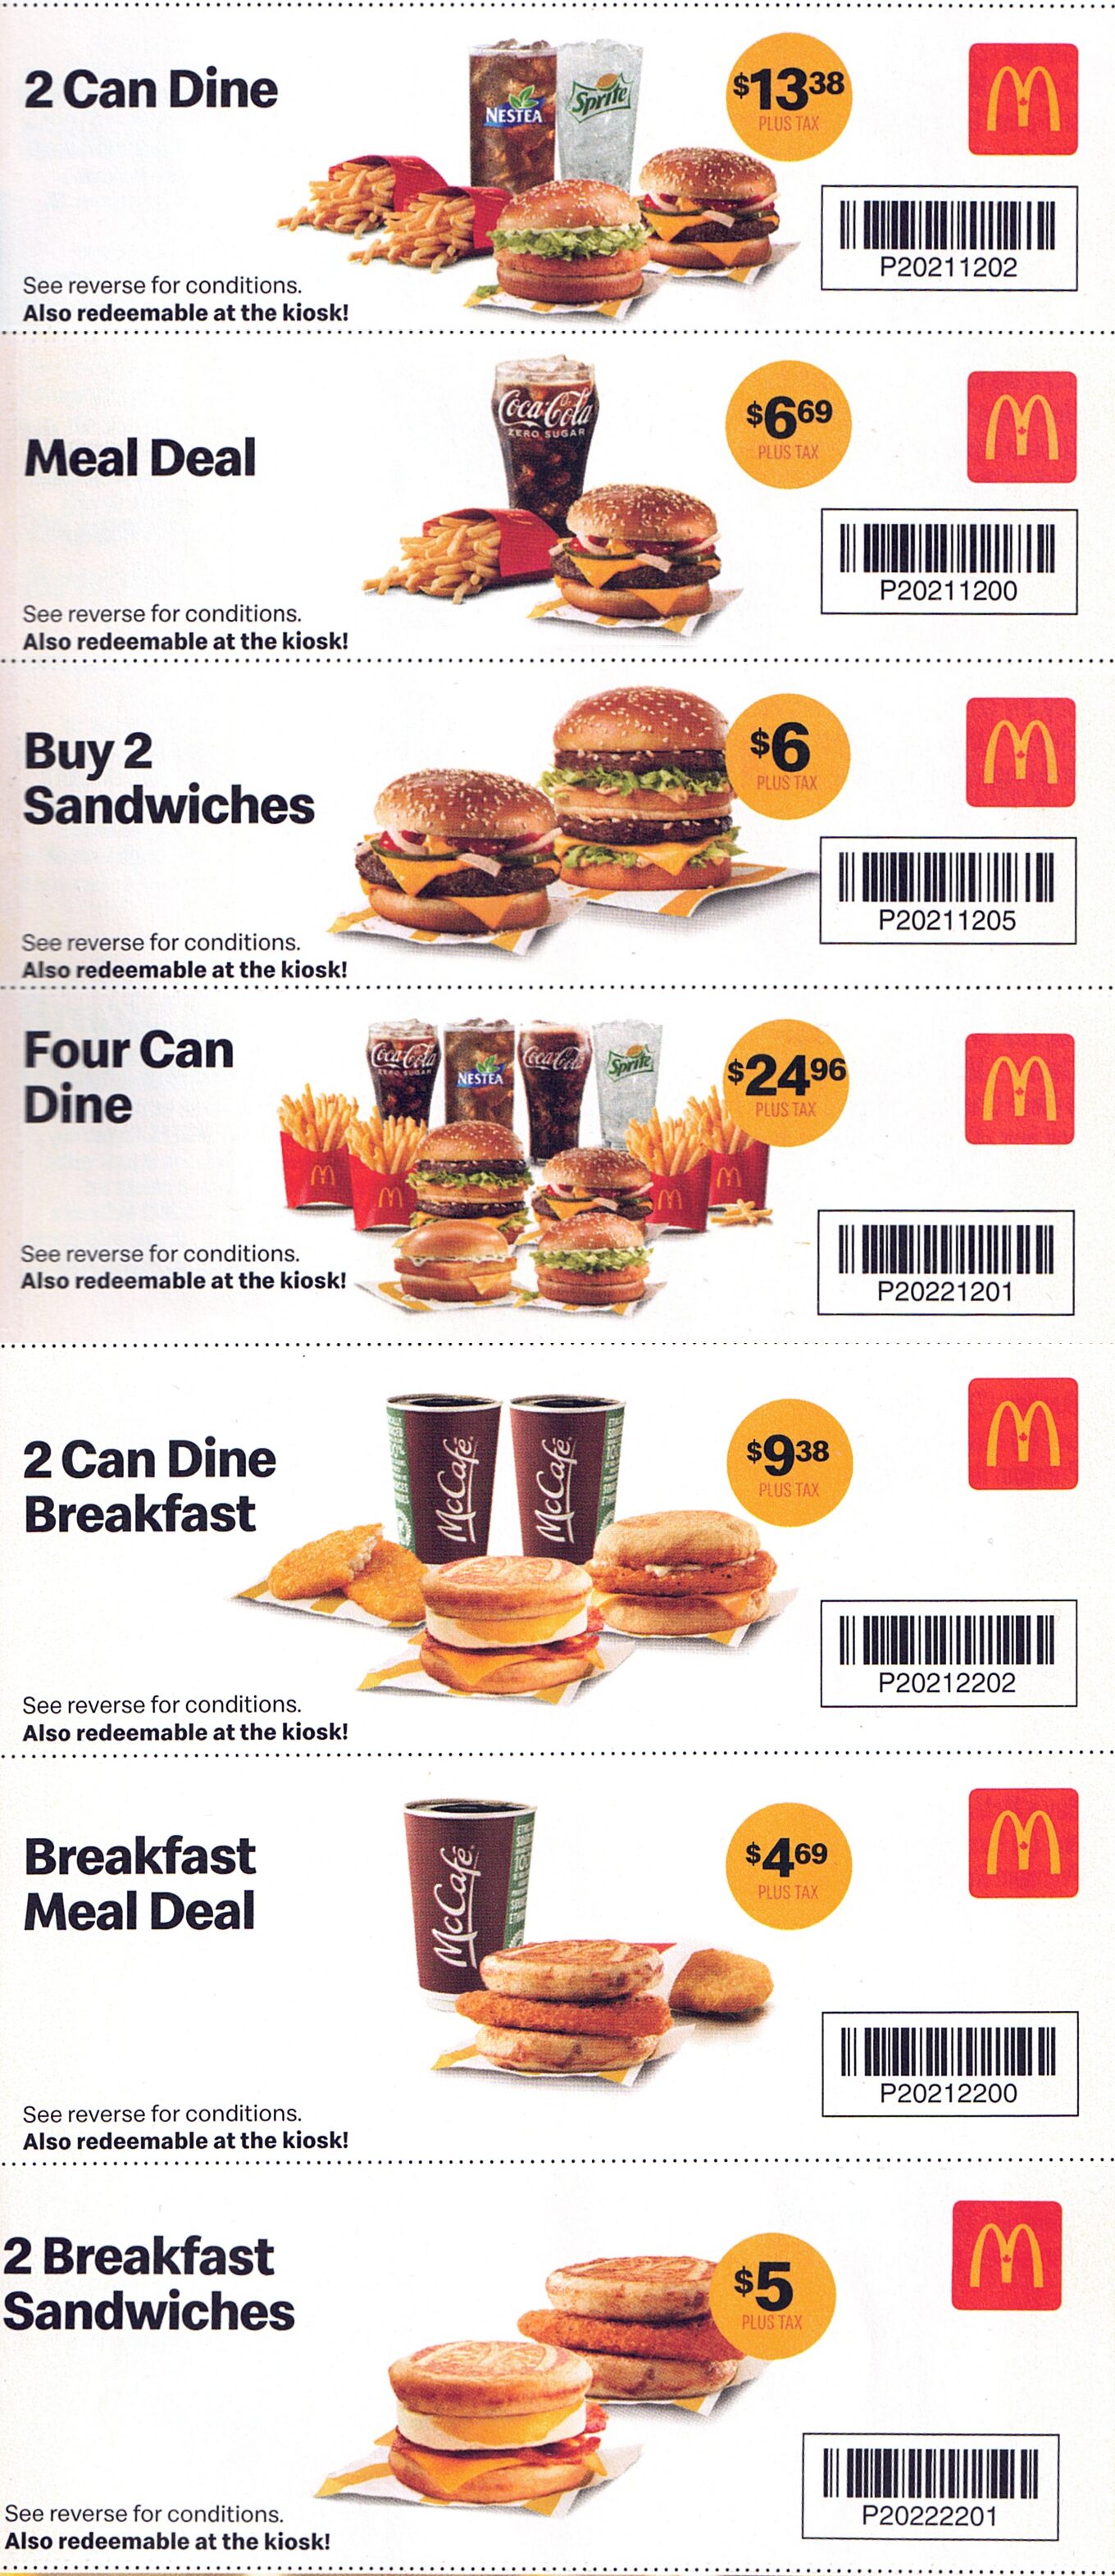 [McDonalds] New spring 2022 coupons Page 2 Forums